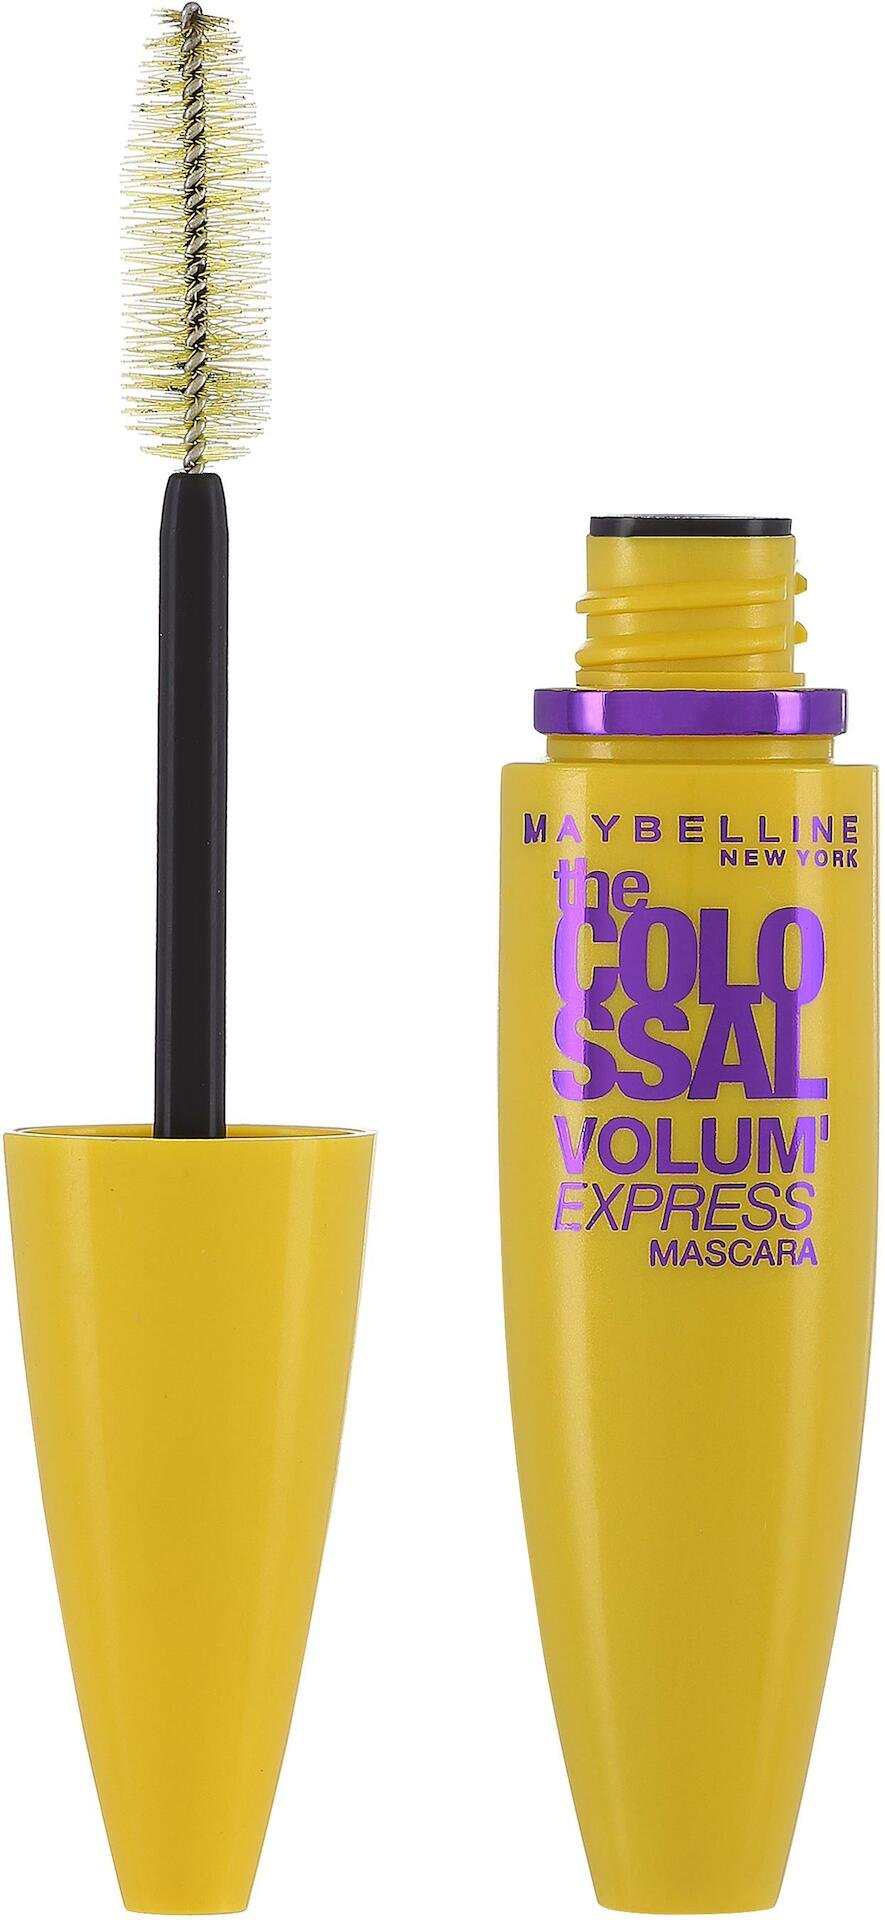 Maybelline New York The Colossal Mascara Black